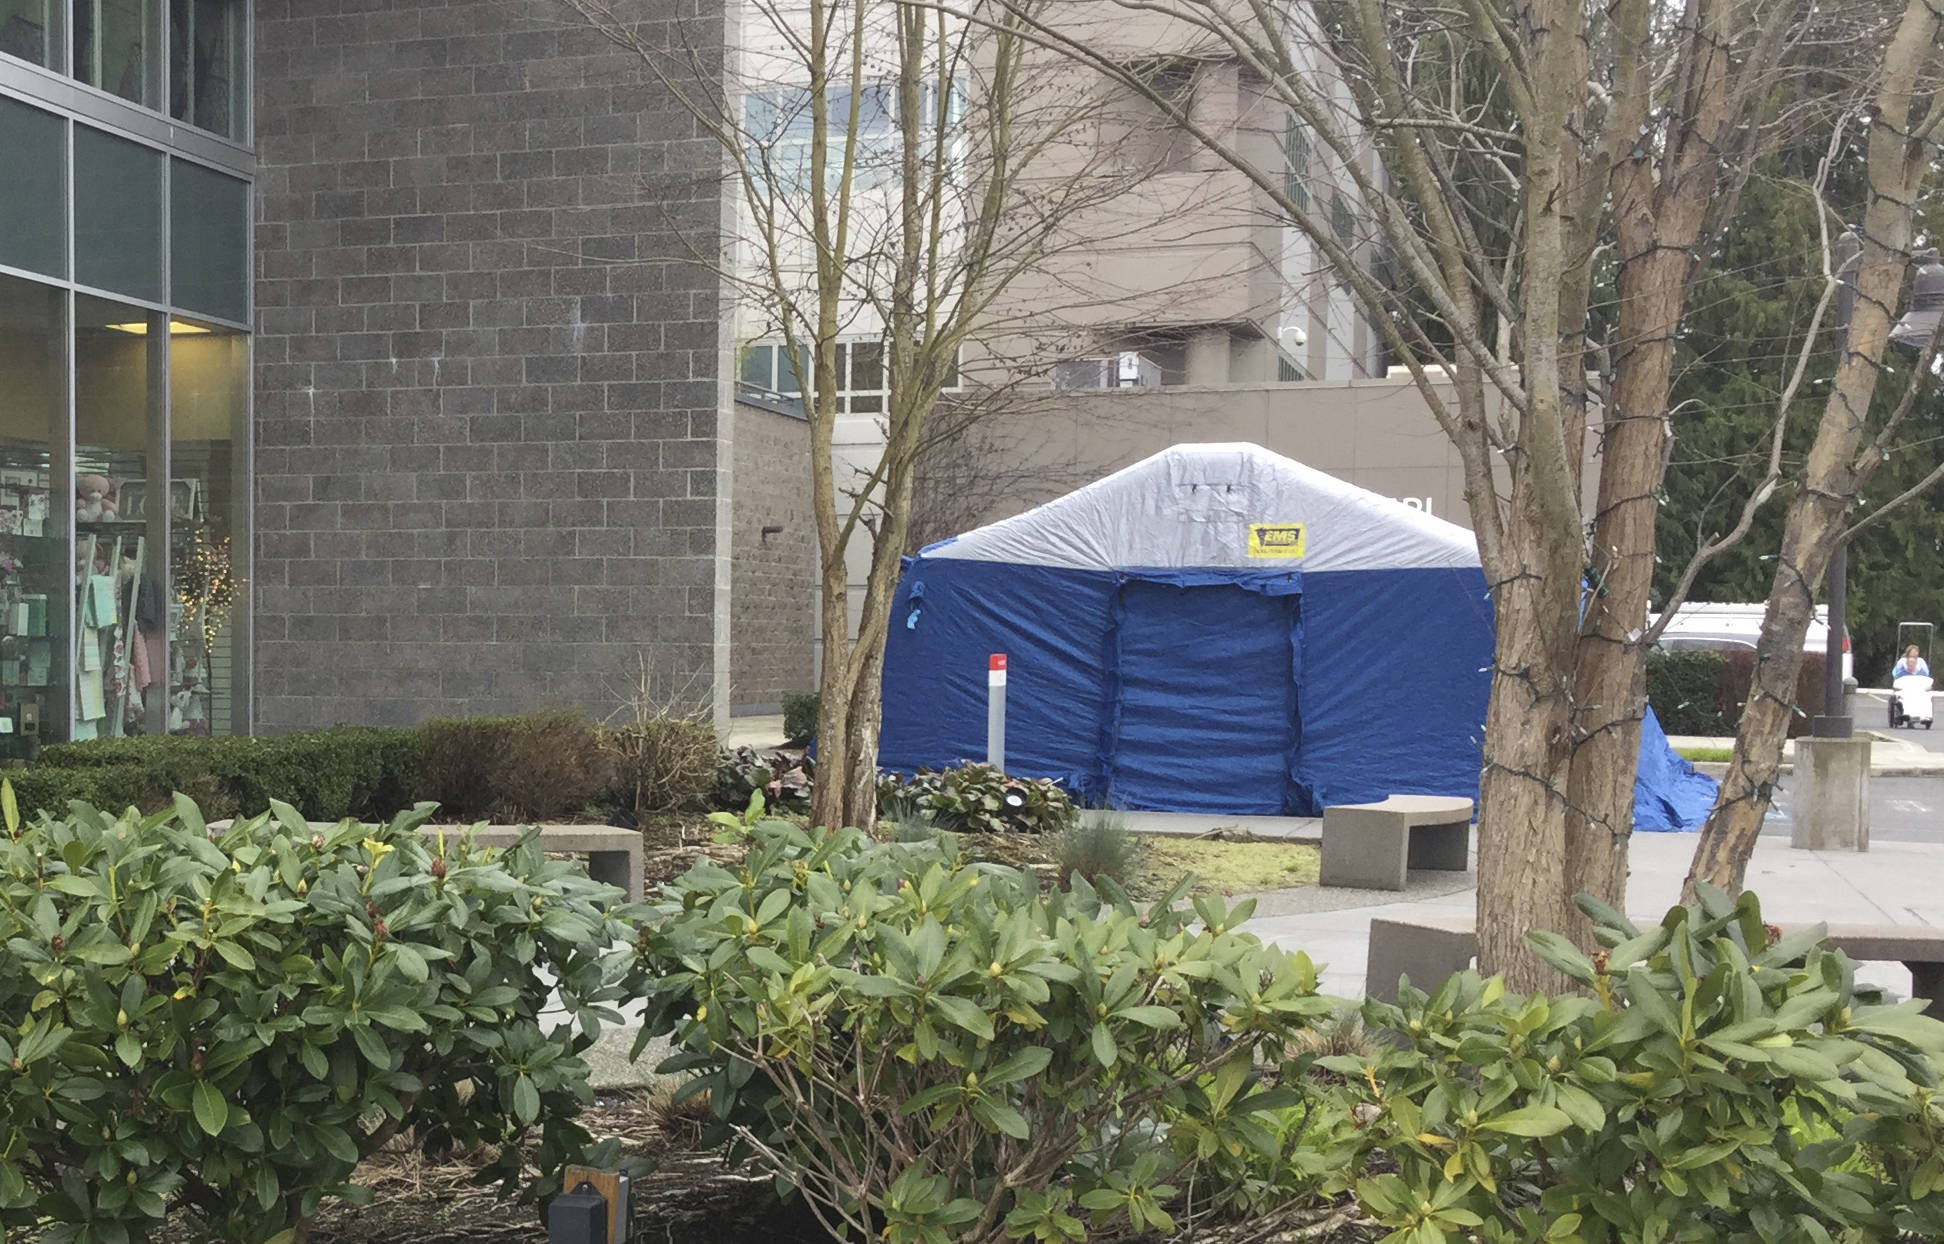 A tent is set up outside Cascade Valley Hospital in Arlington to screen people for symptoms of possible coronavirus before entering the hospital.